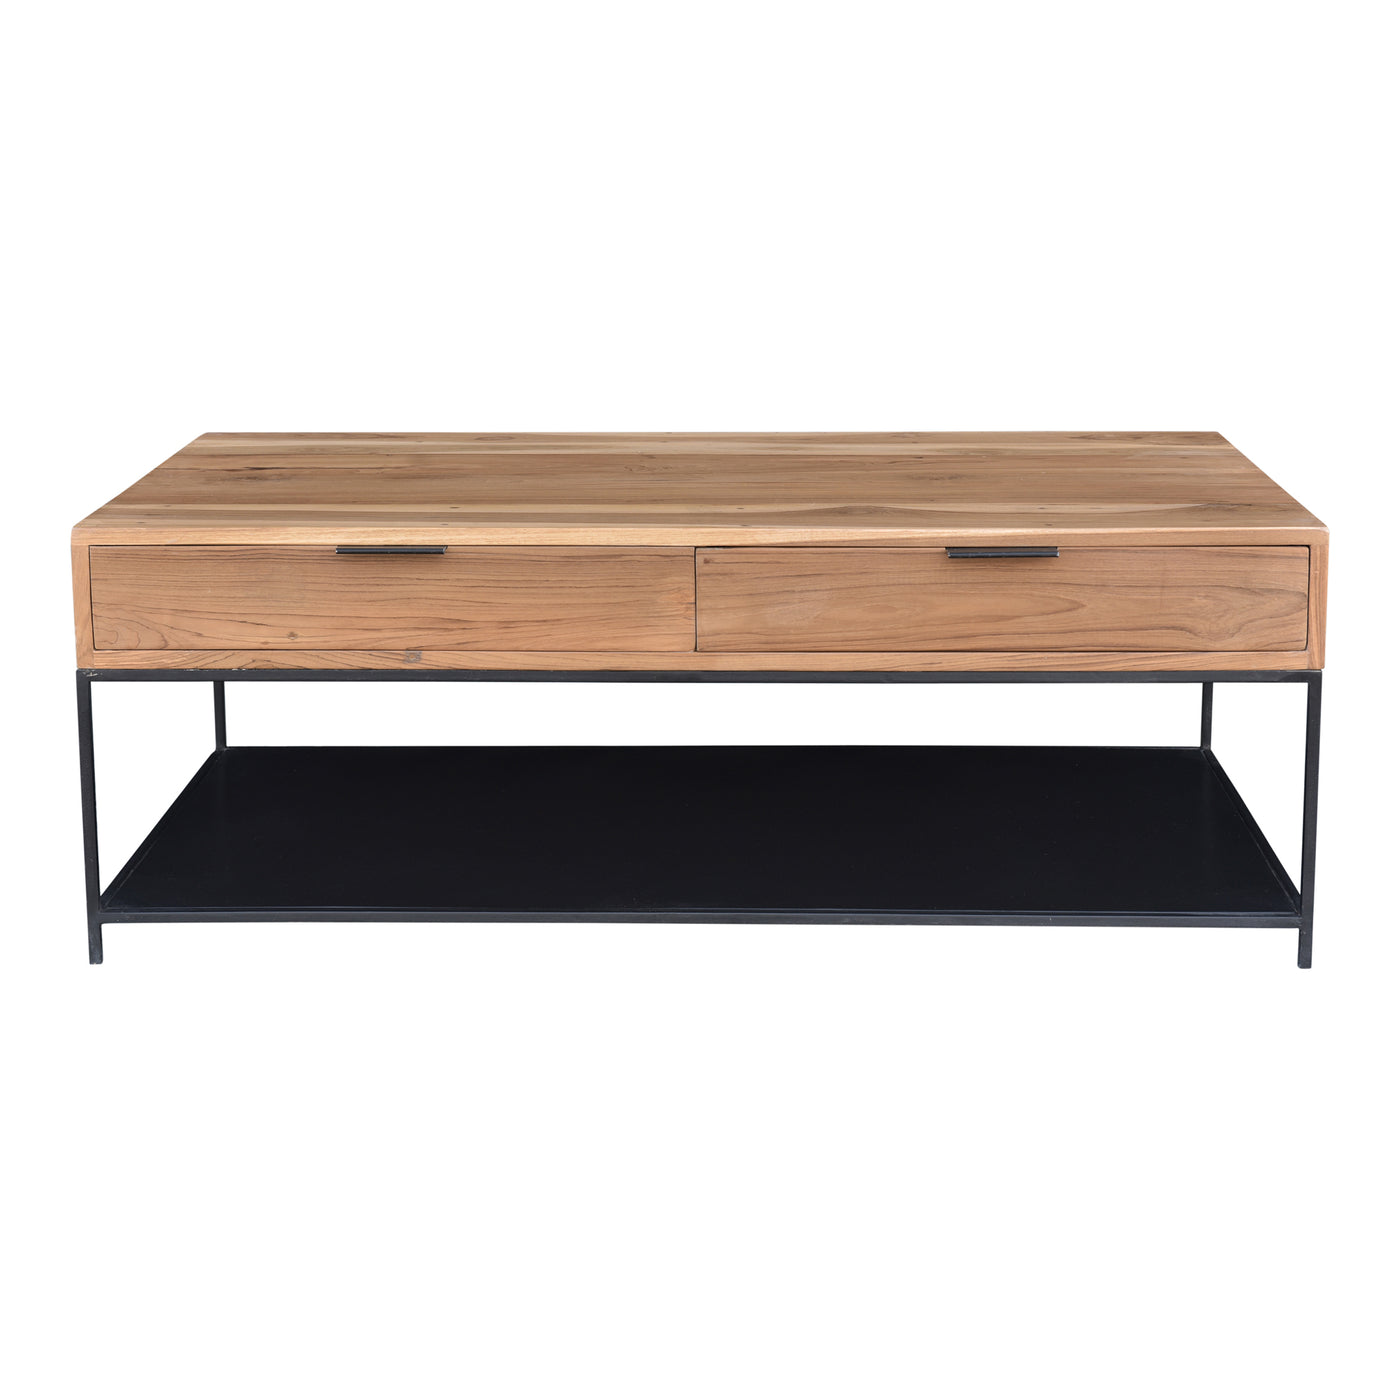 Made from solid teak wood, the Joliet coffee table brings a contemporary edge to your space. Two spacious drawers for stor...